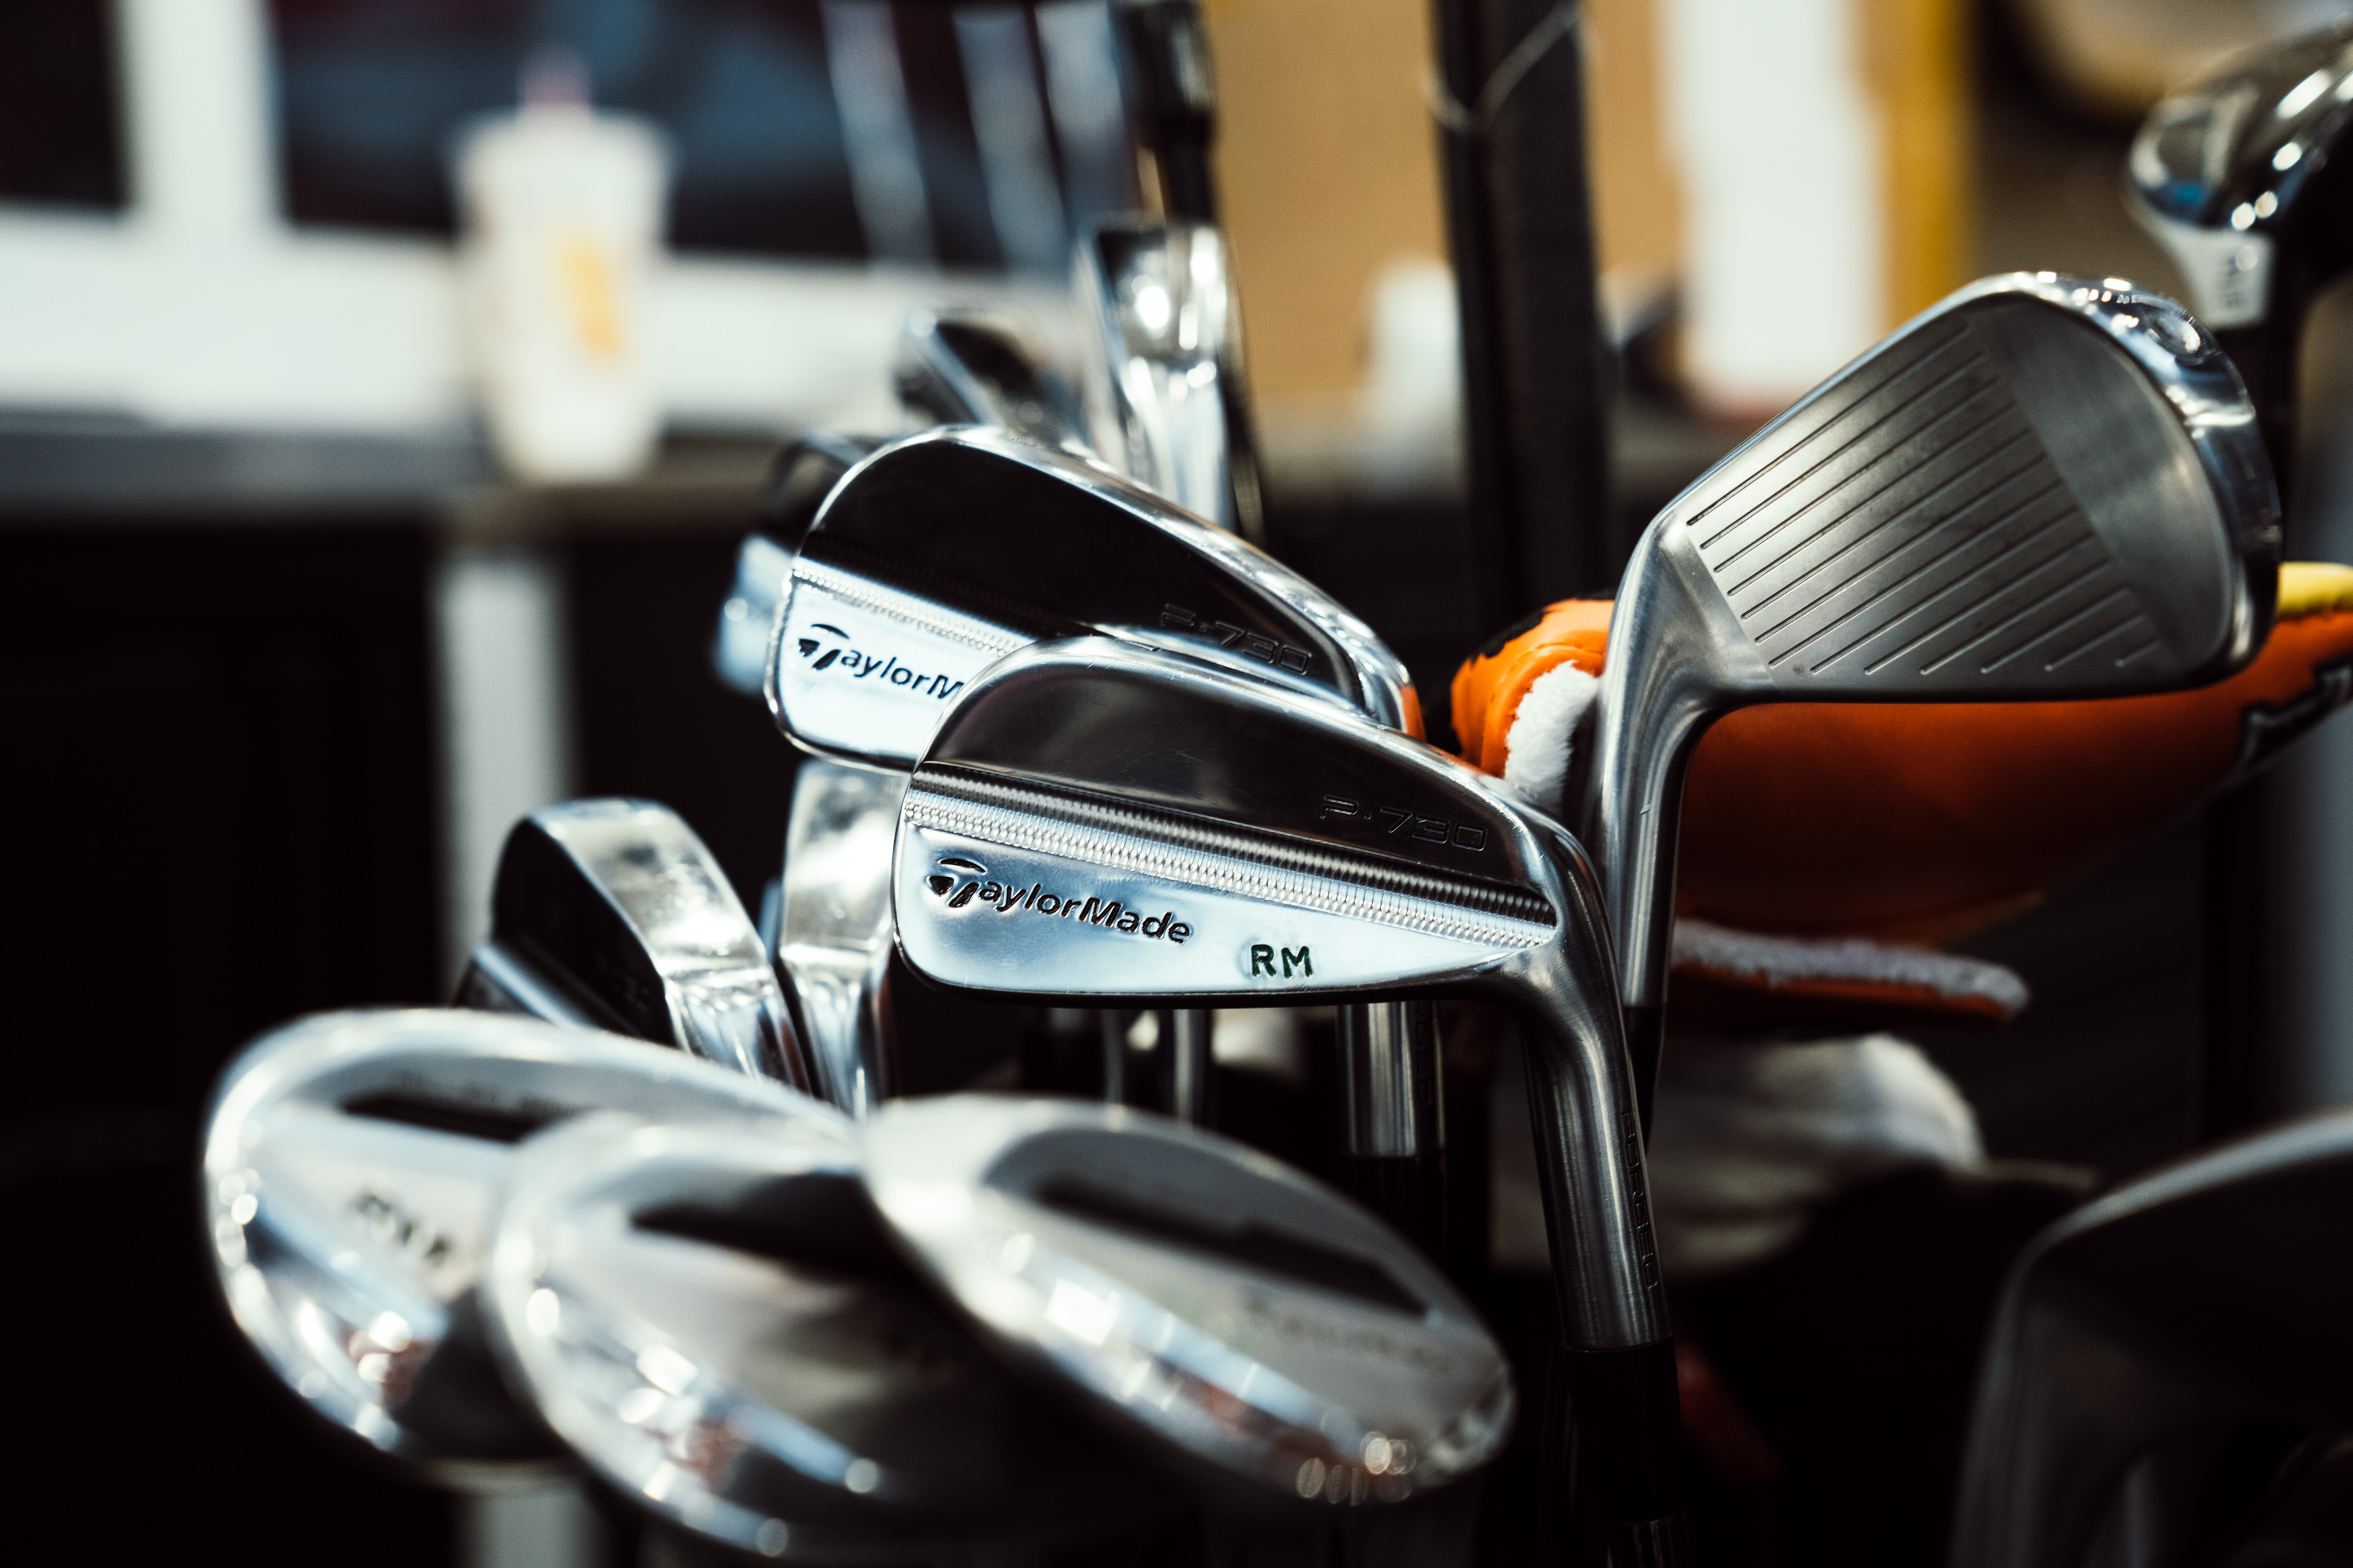 We Went Behind The Scenes With TaylorMade Making A Stop At The Kingdom ...